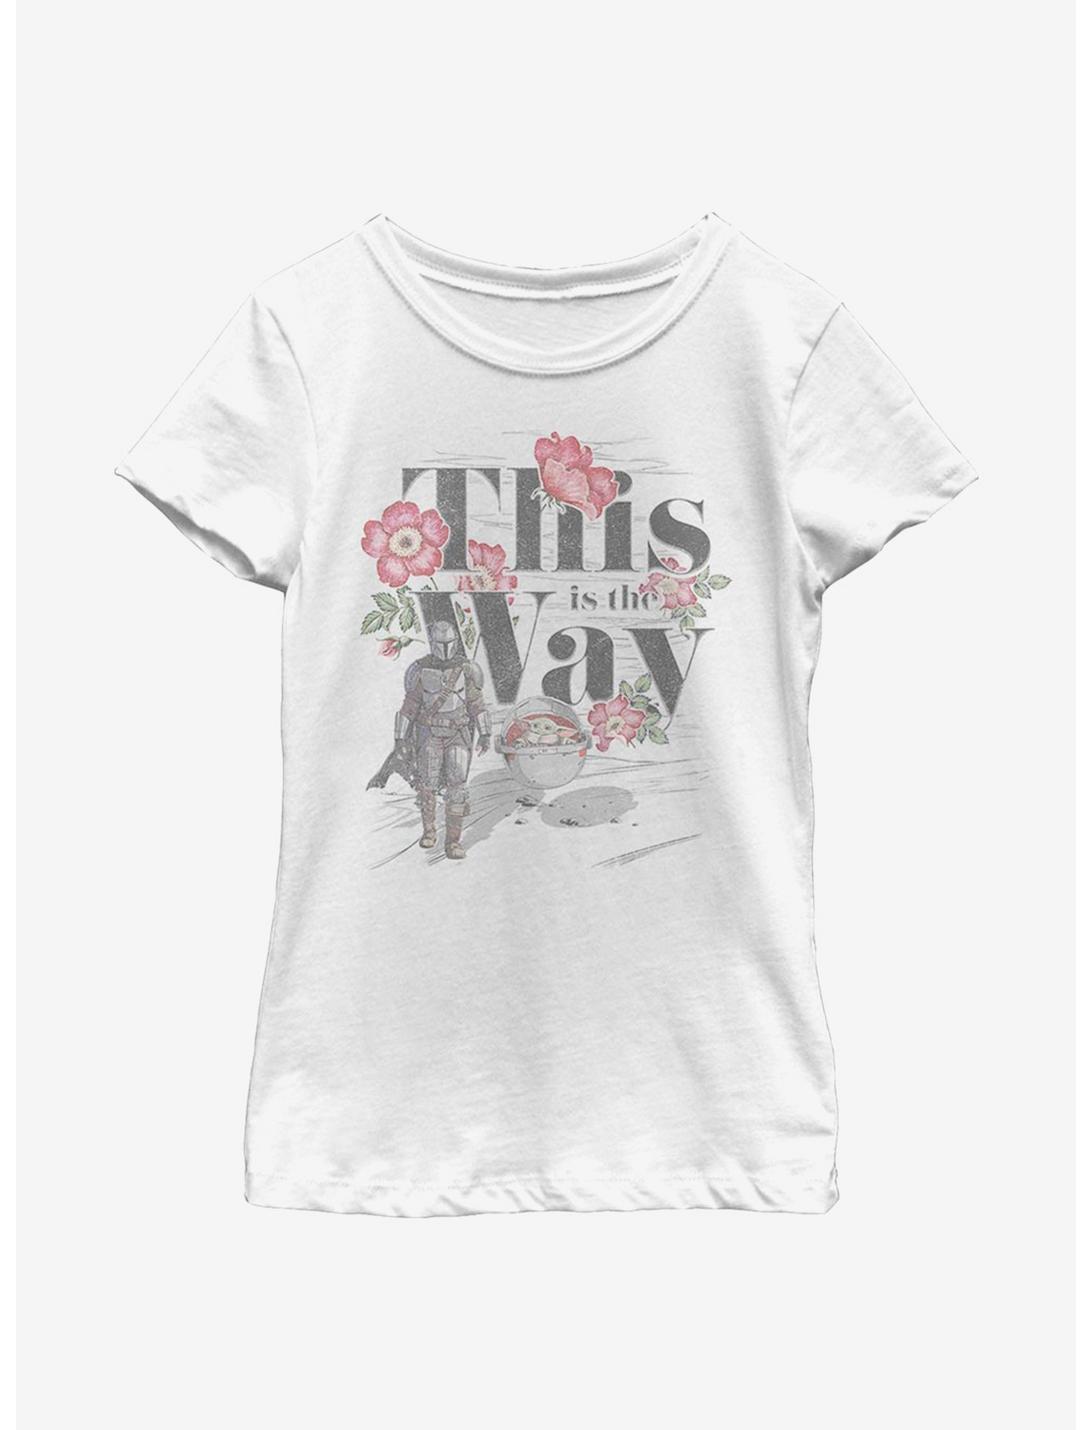 Star Wars The Mandalorian The Child Way Floral Youth Girls T-Shirt, WHITE, hi-res